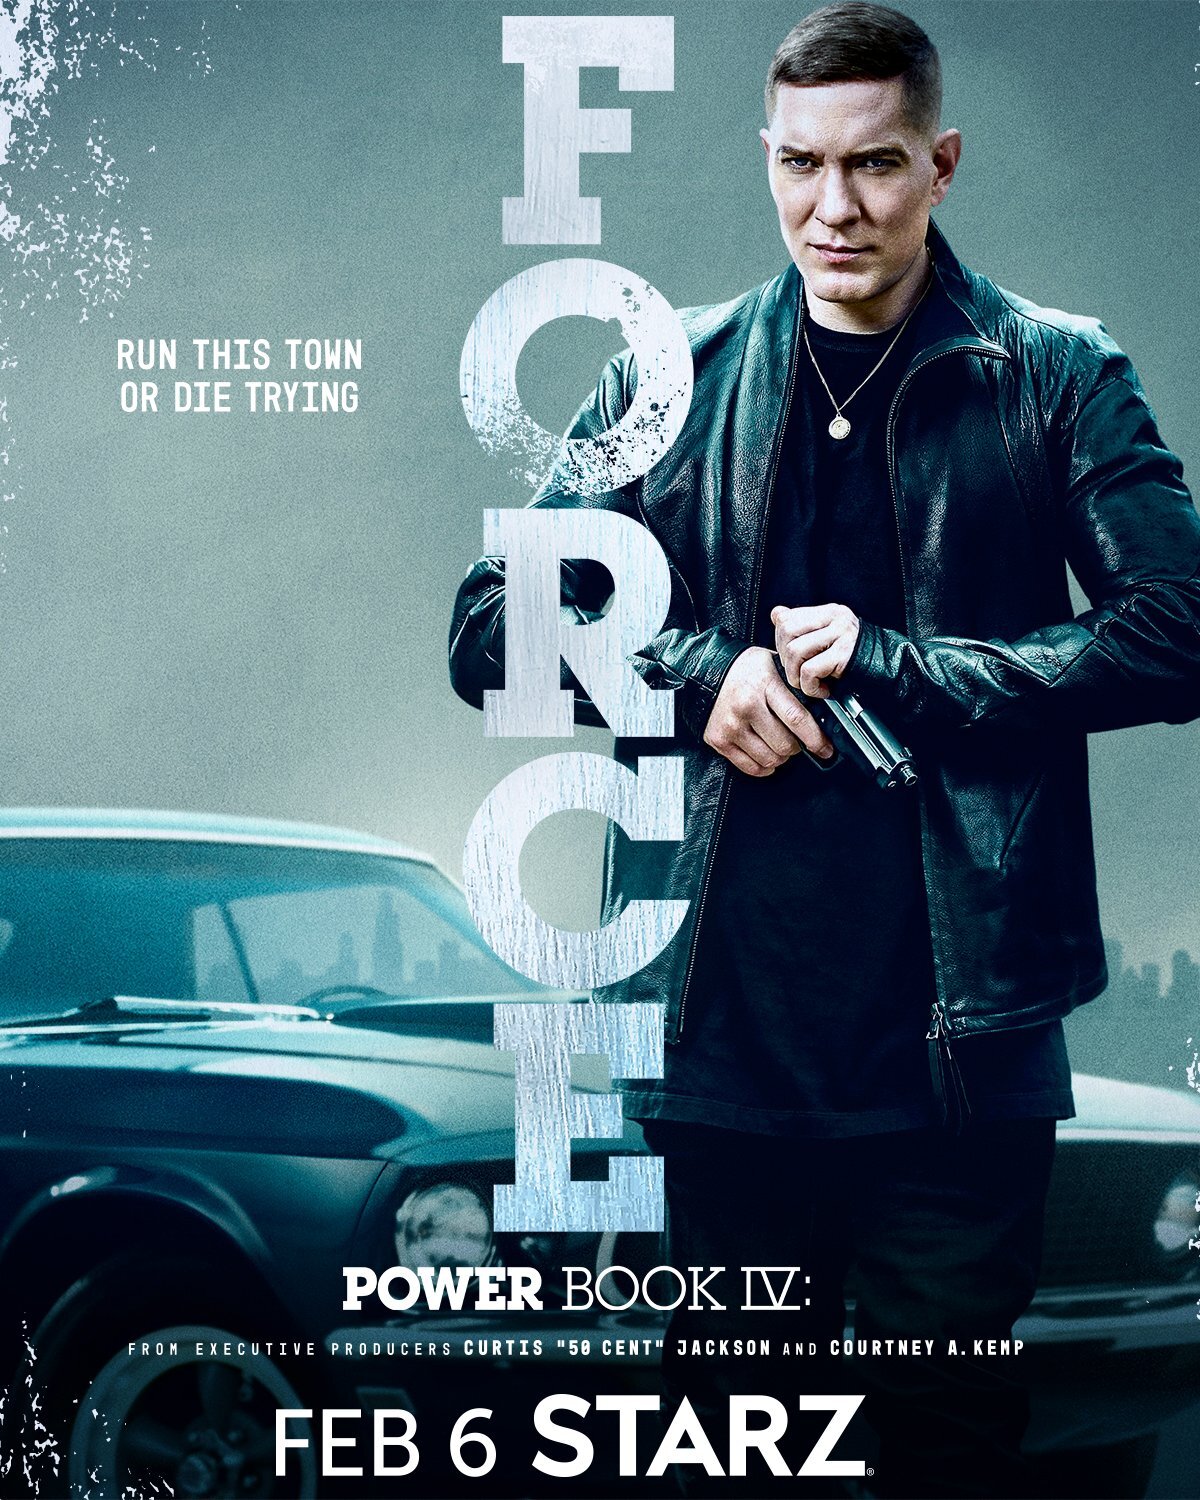 New Clip From Starz Original Series 'Power Book IV: Force' - Season 1, Episode 6